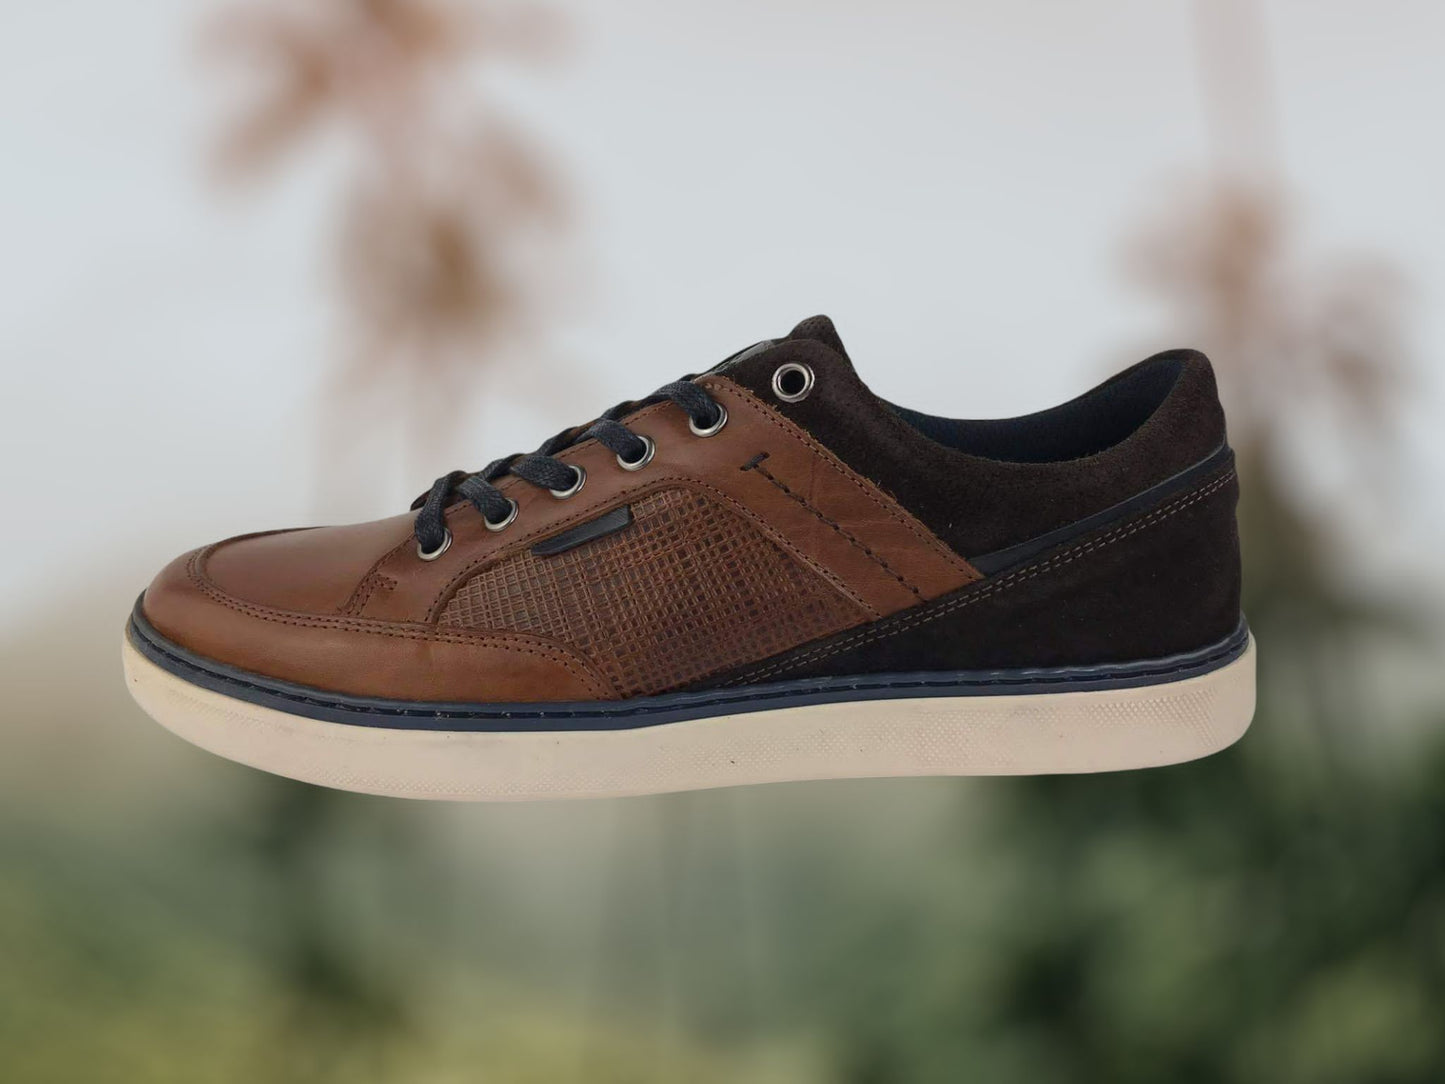 48Hours | Street sneakers with laces in caramel colored leather Belize